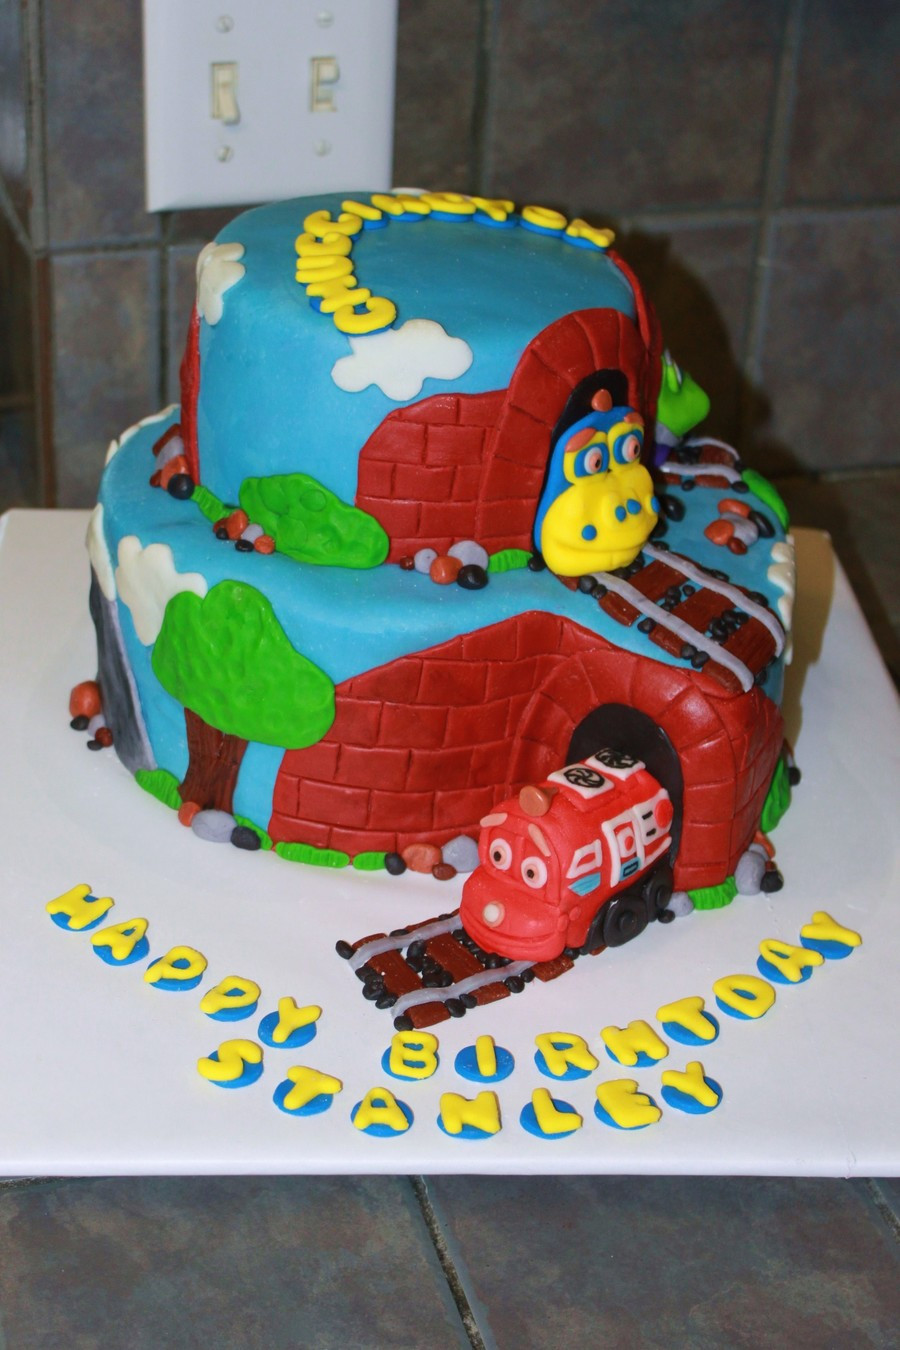 Chuggington Birthday Cake
 Chuggington Birthday Cake CakeCentral